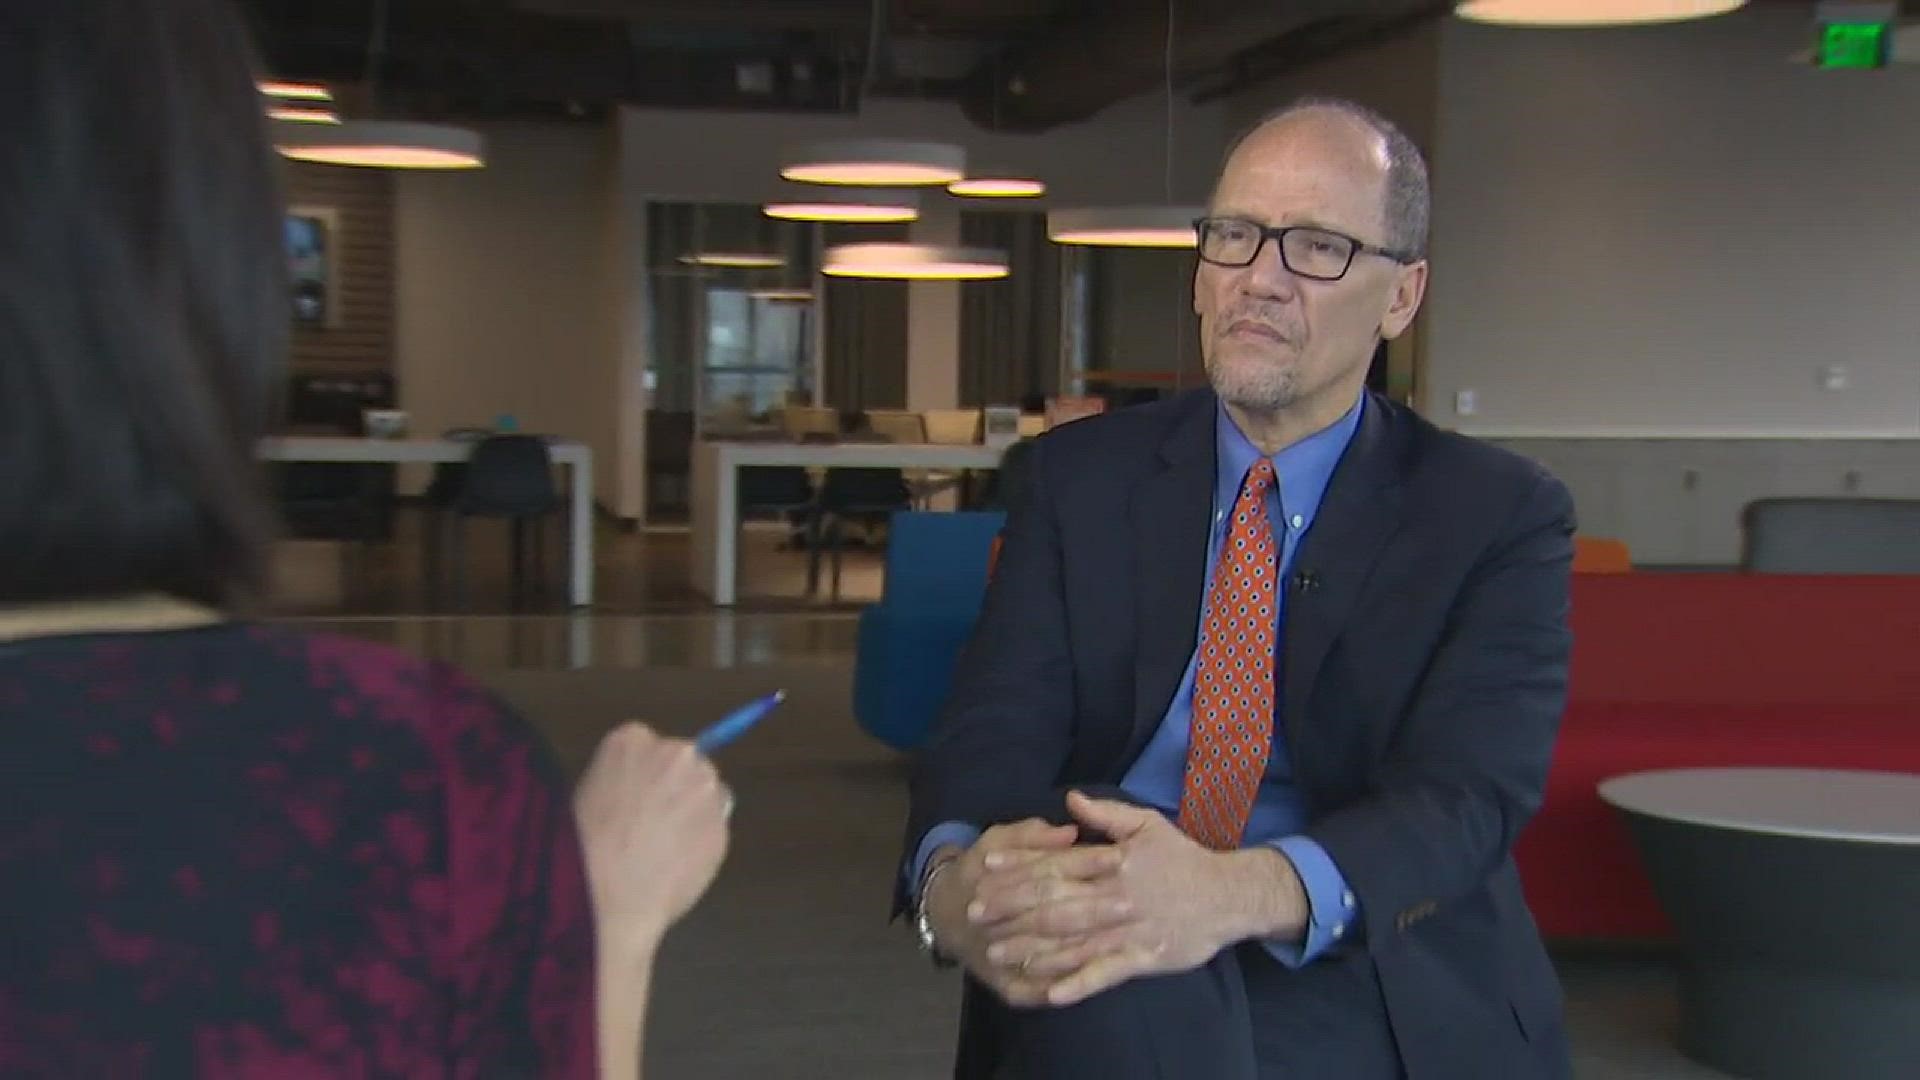 Democratic National Committee Chairman Tom Perez talks about steps to prepare for the 2020 election.